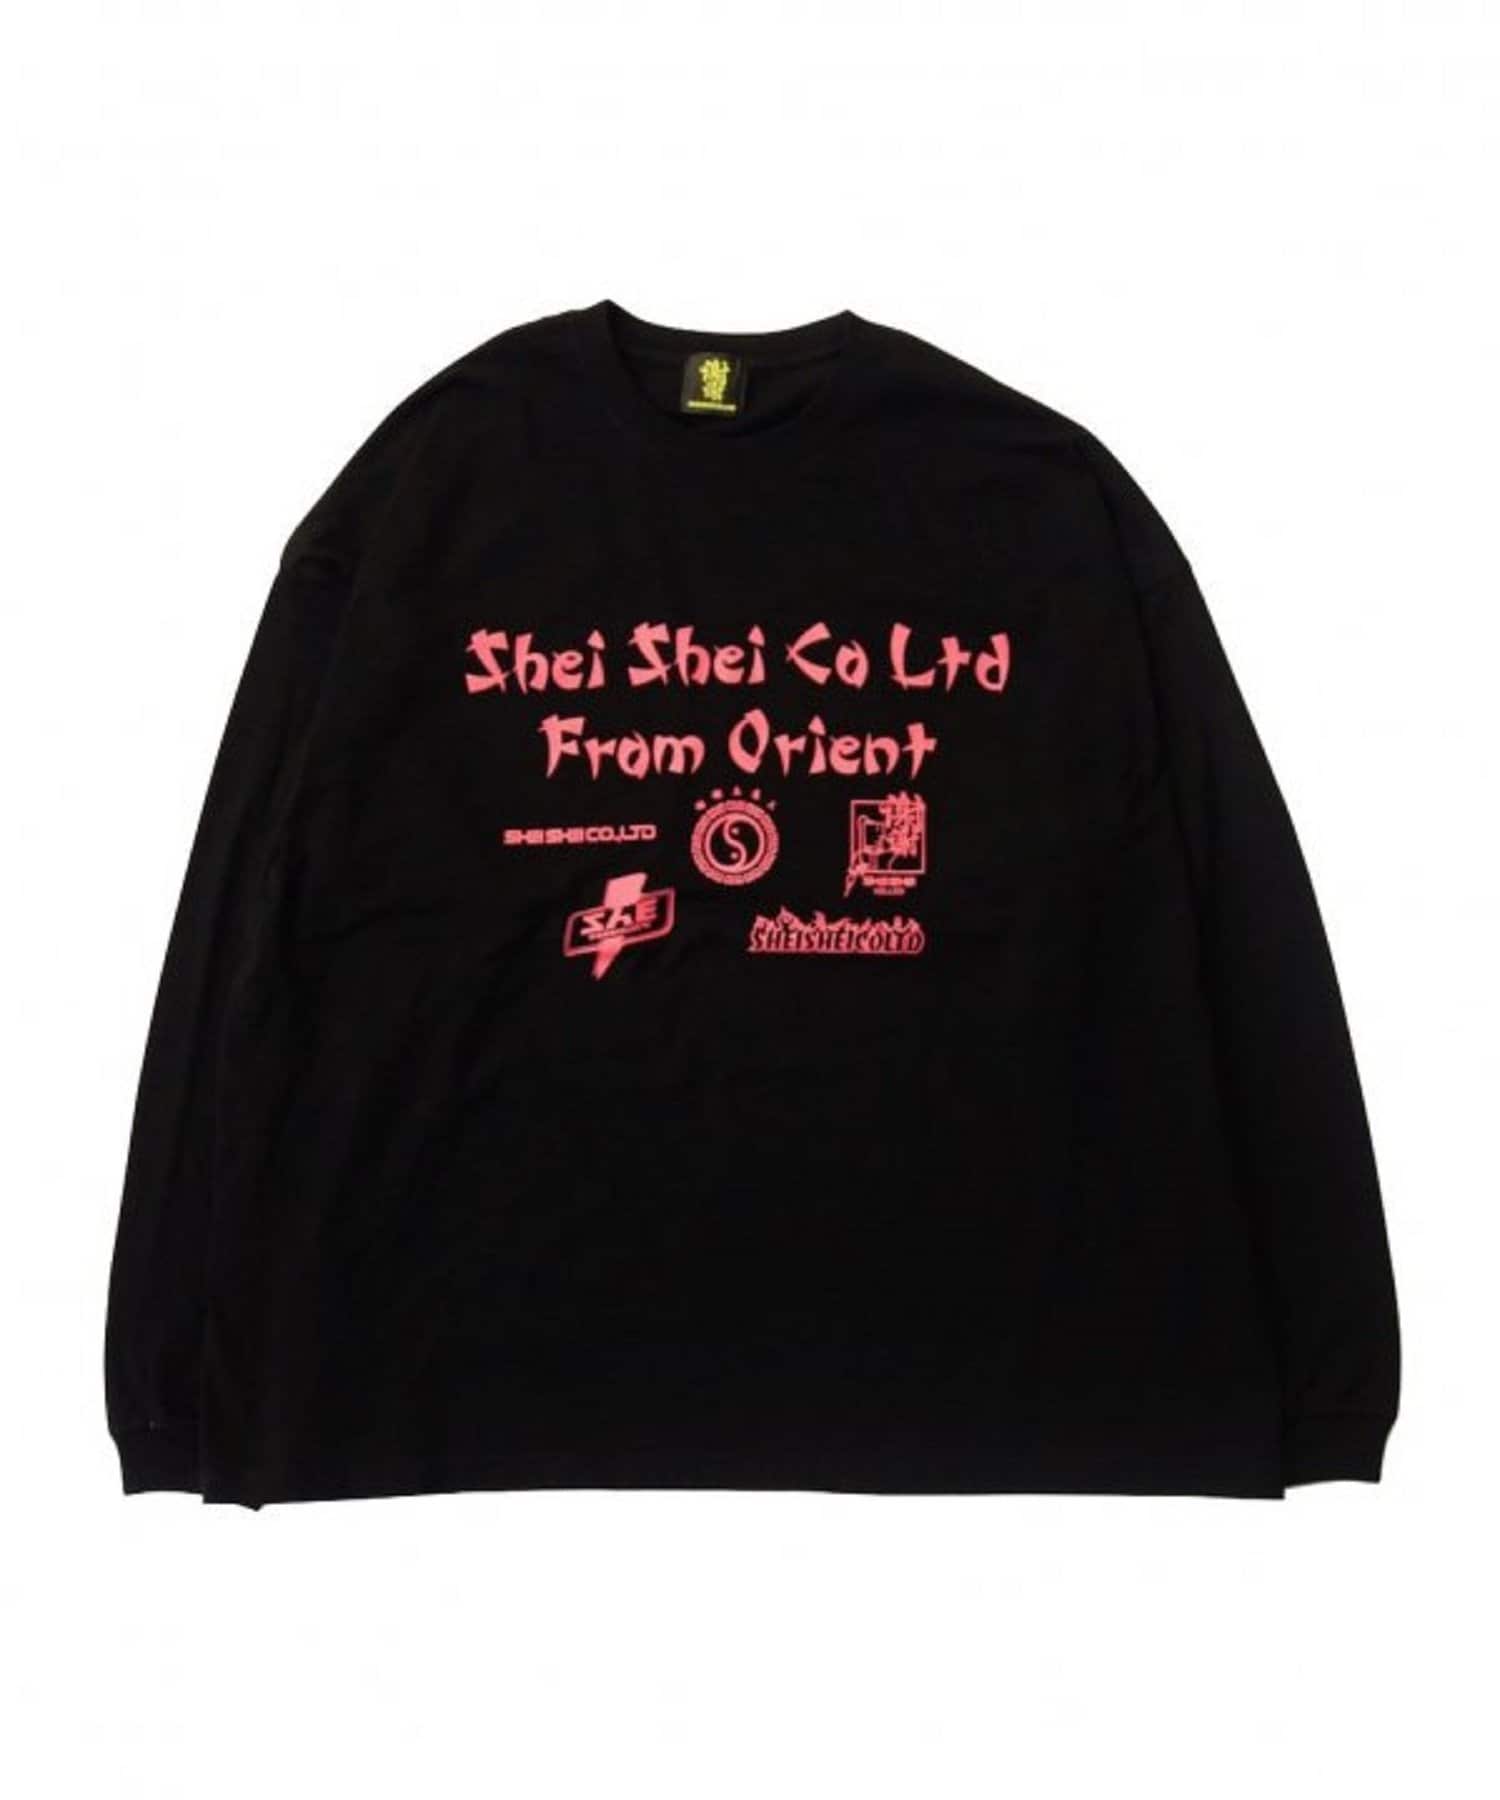 WHO’S WHO gallery(フーズフーギャラリー) 【SHEI SHEI/シェイシェイ】FLYER L/S TEE